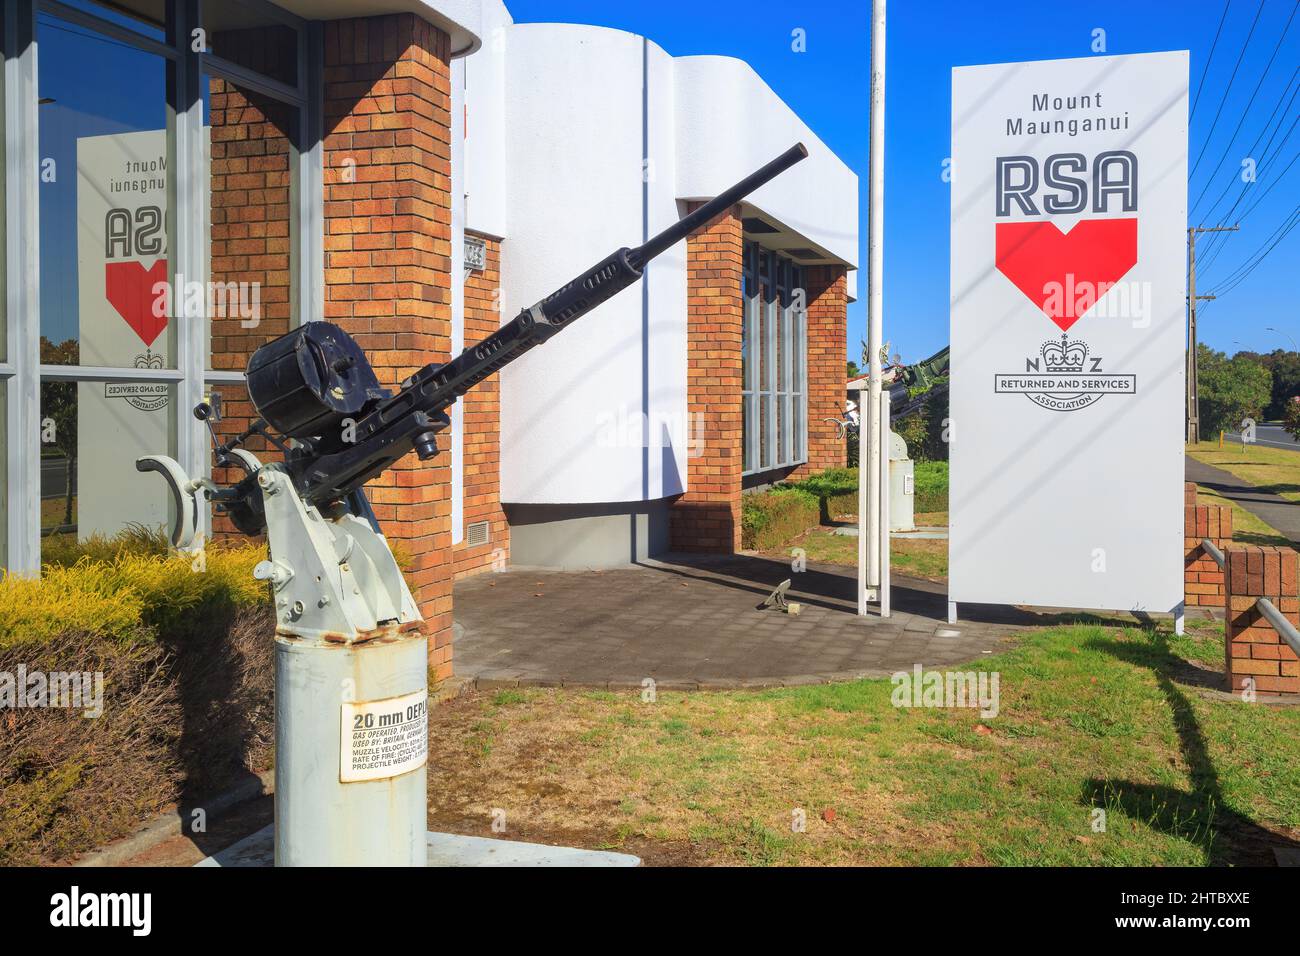 The RSA (Returned and Services Association) building in Mount Maunganui, New Zealand, with a WW2-era Oerlikon 20mm anti-aircraft cannon outside Stock Photo